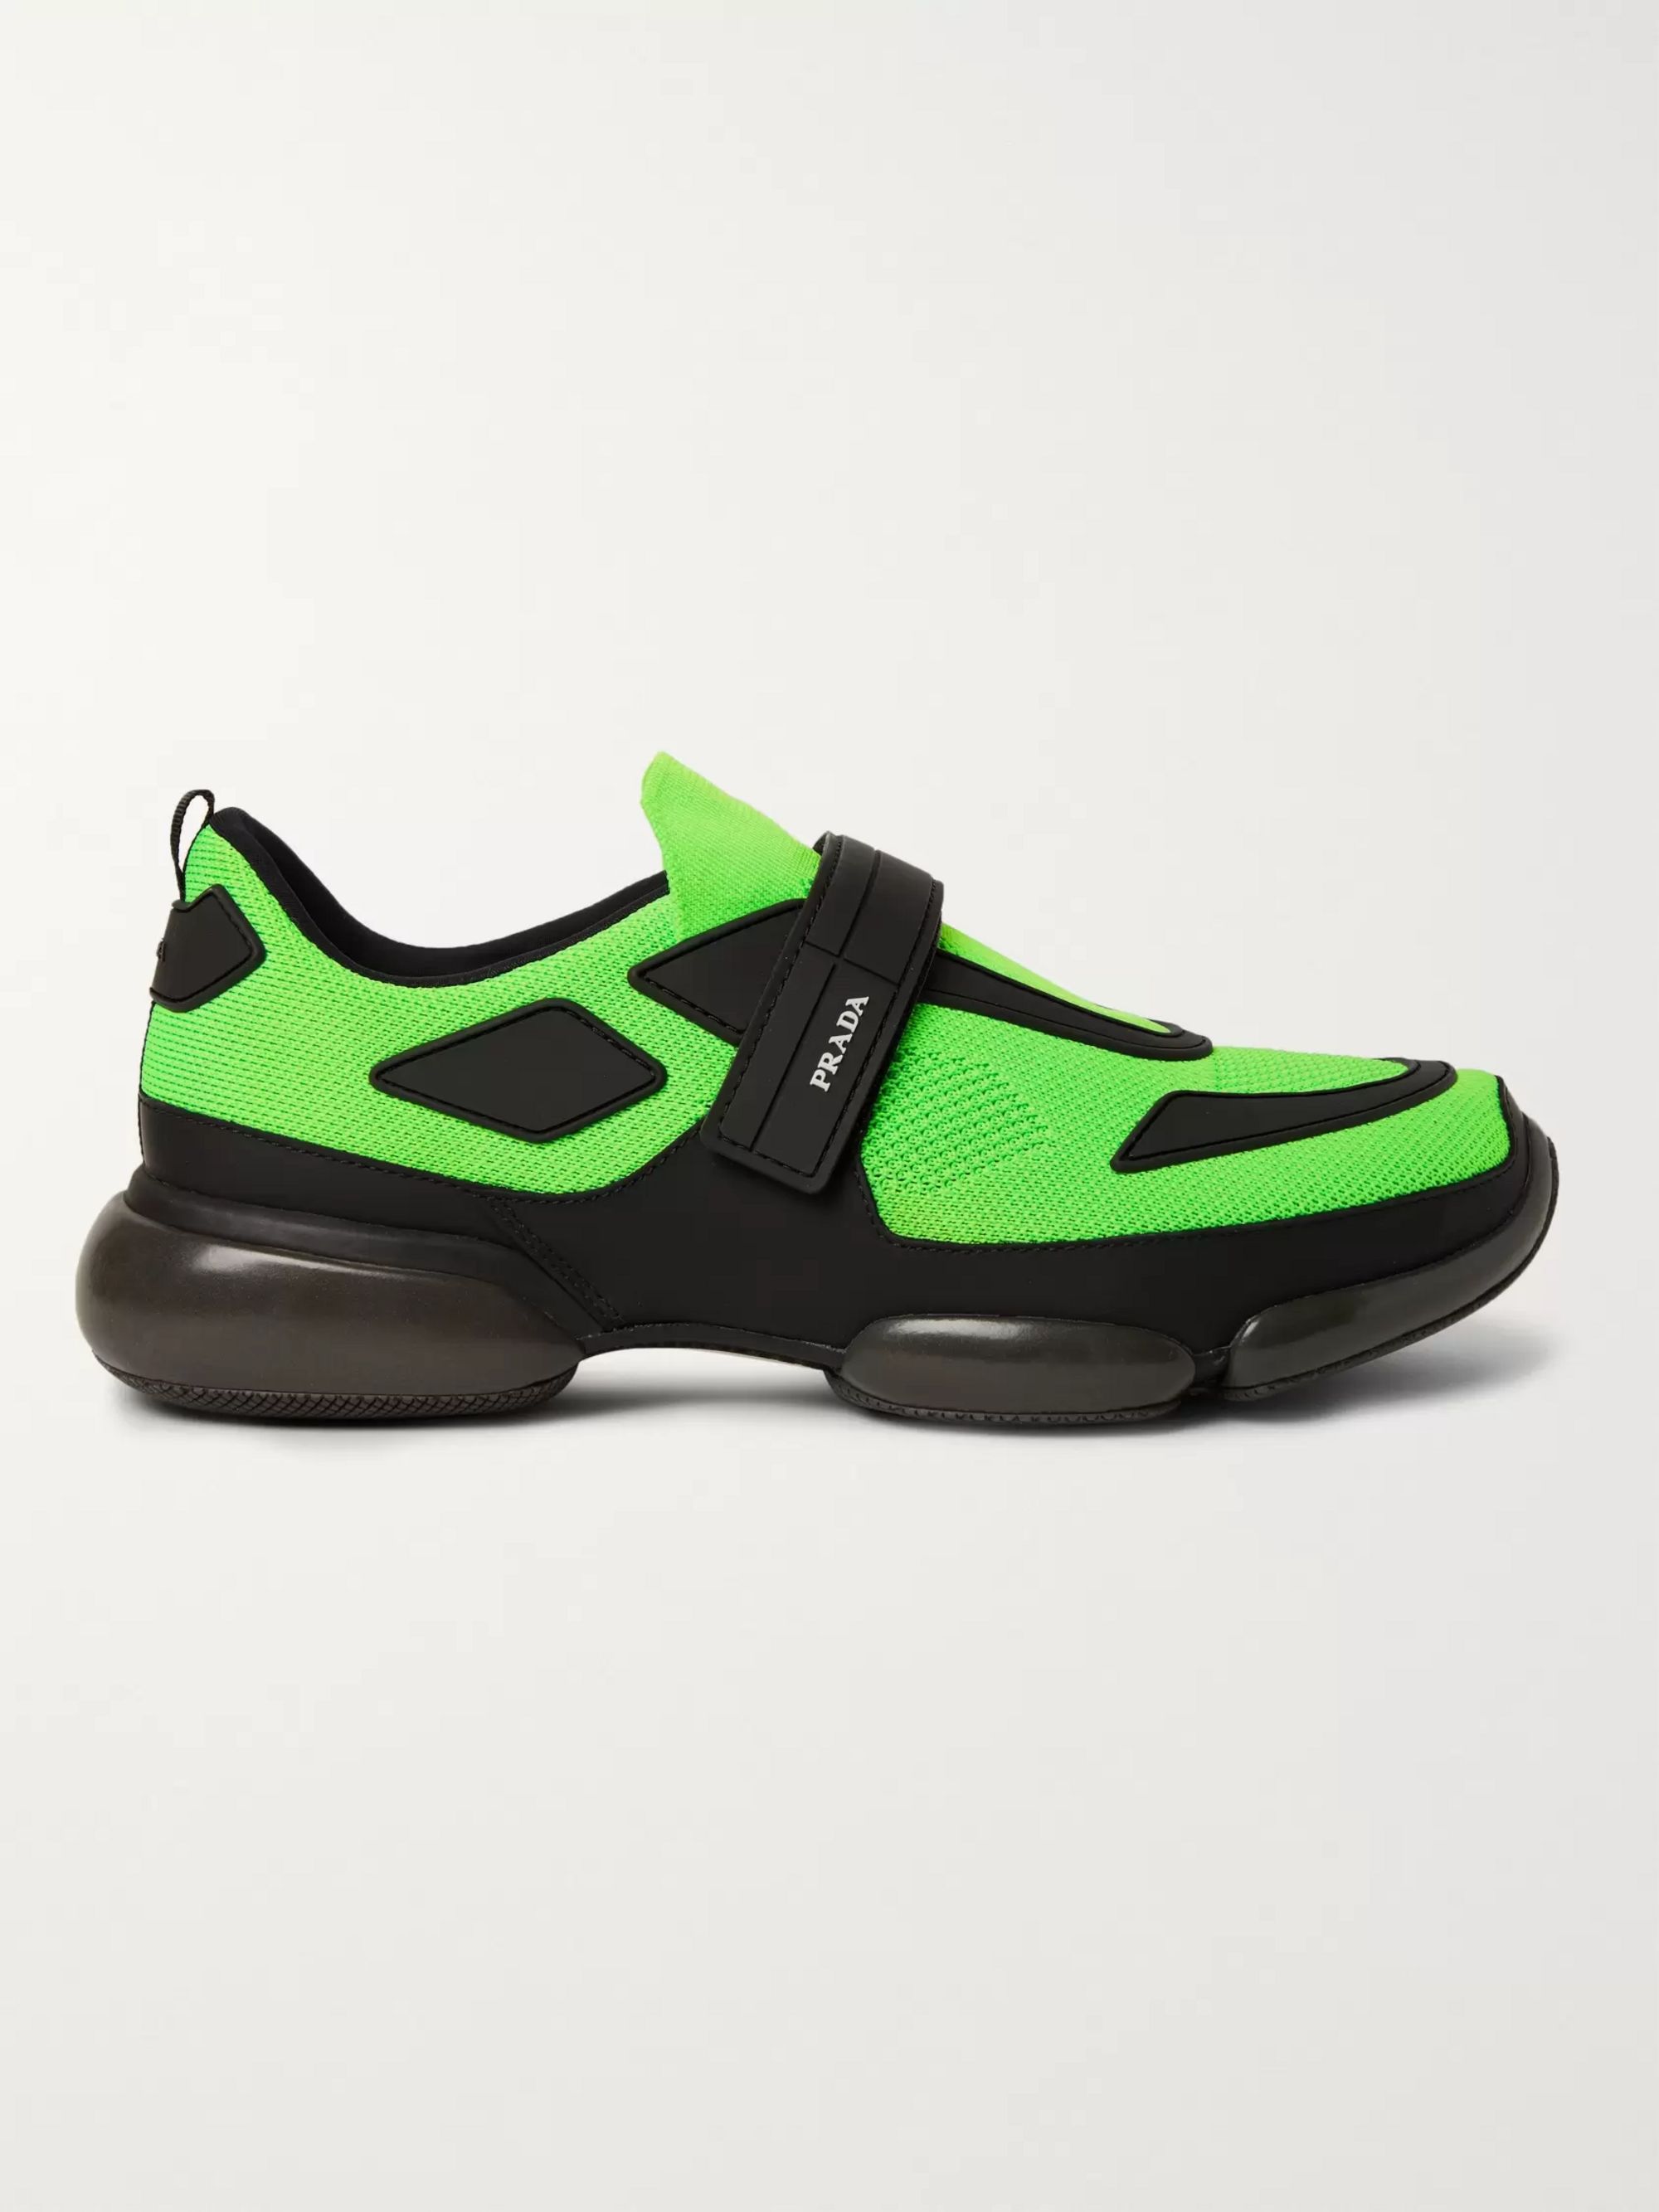 Lime green Cloudbust Mesh, Rubber and Leather Sneakers | PRADA | MR PORTER